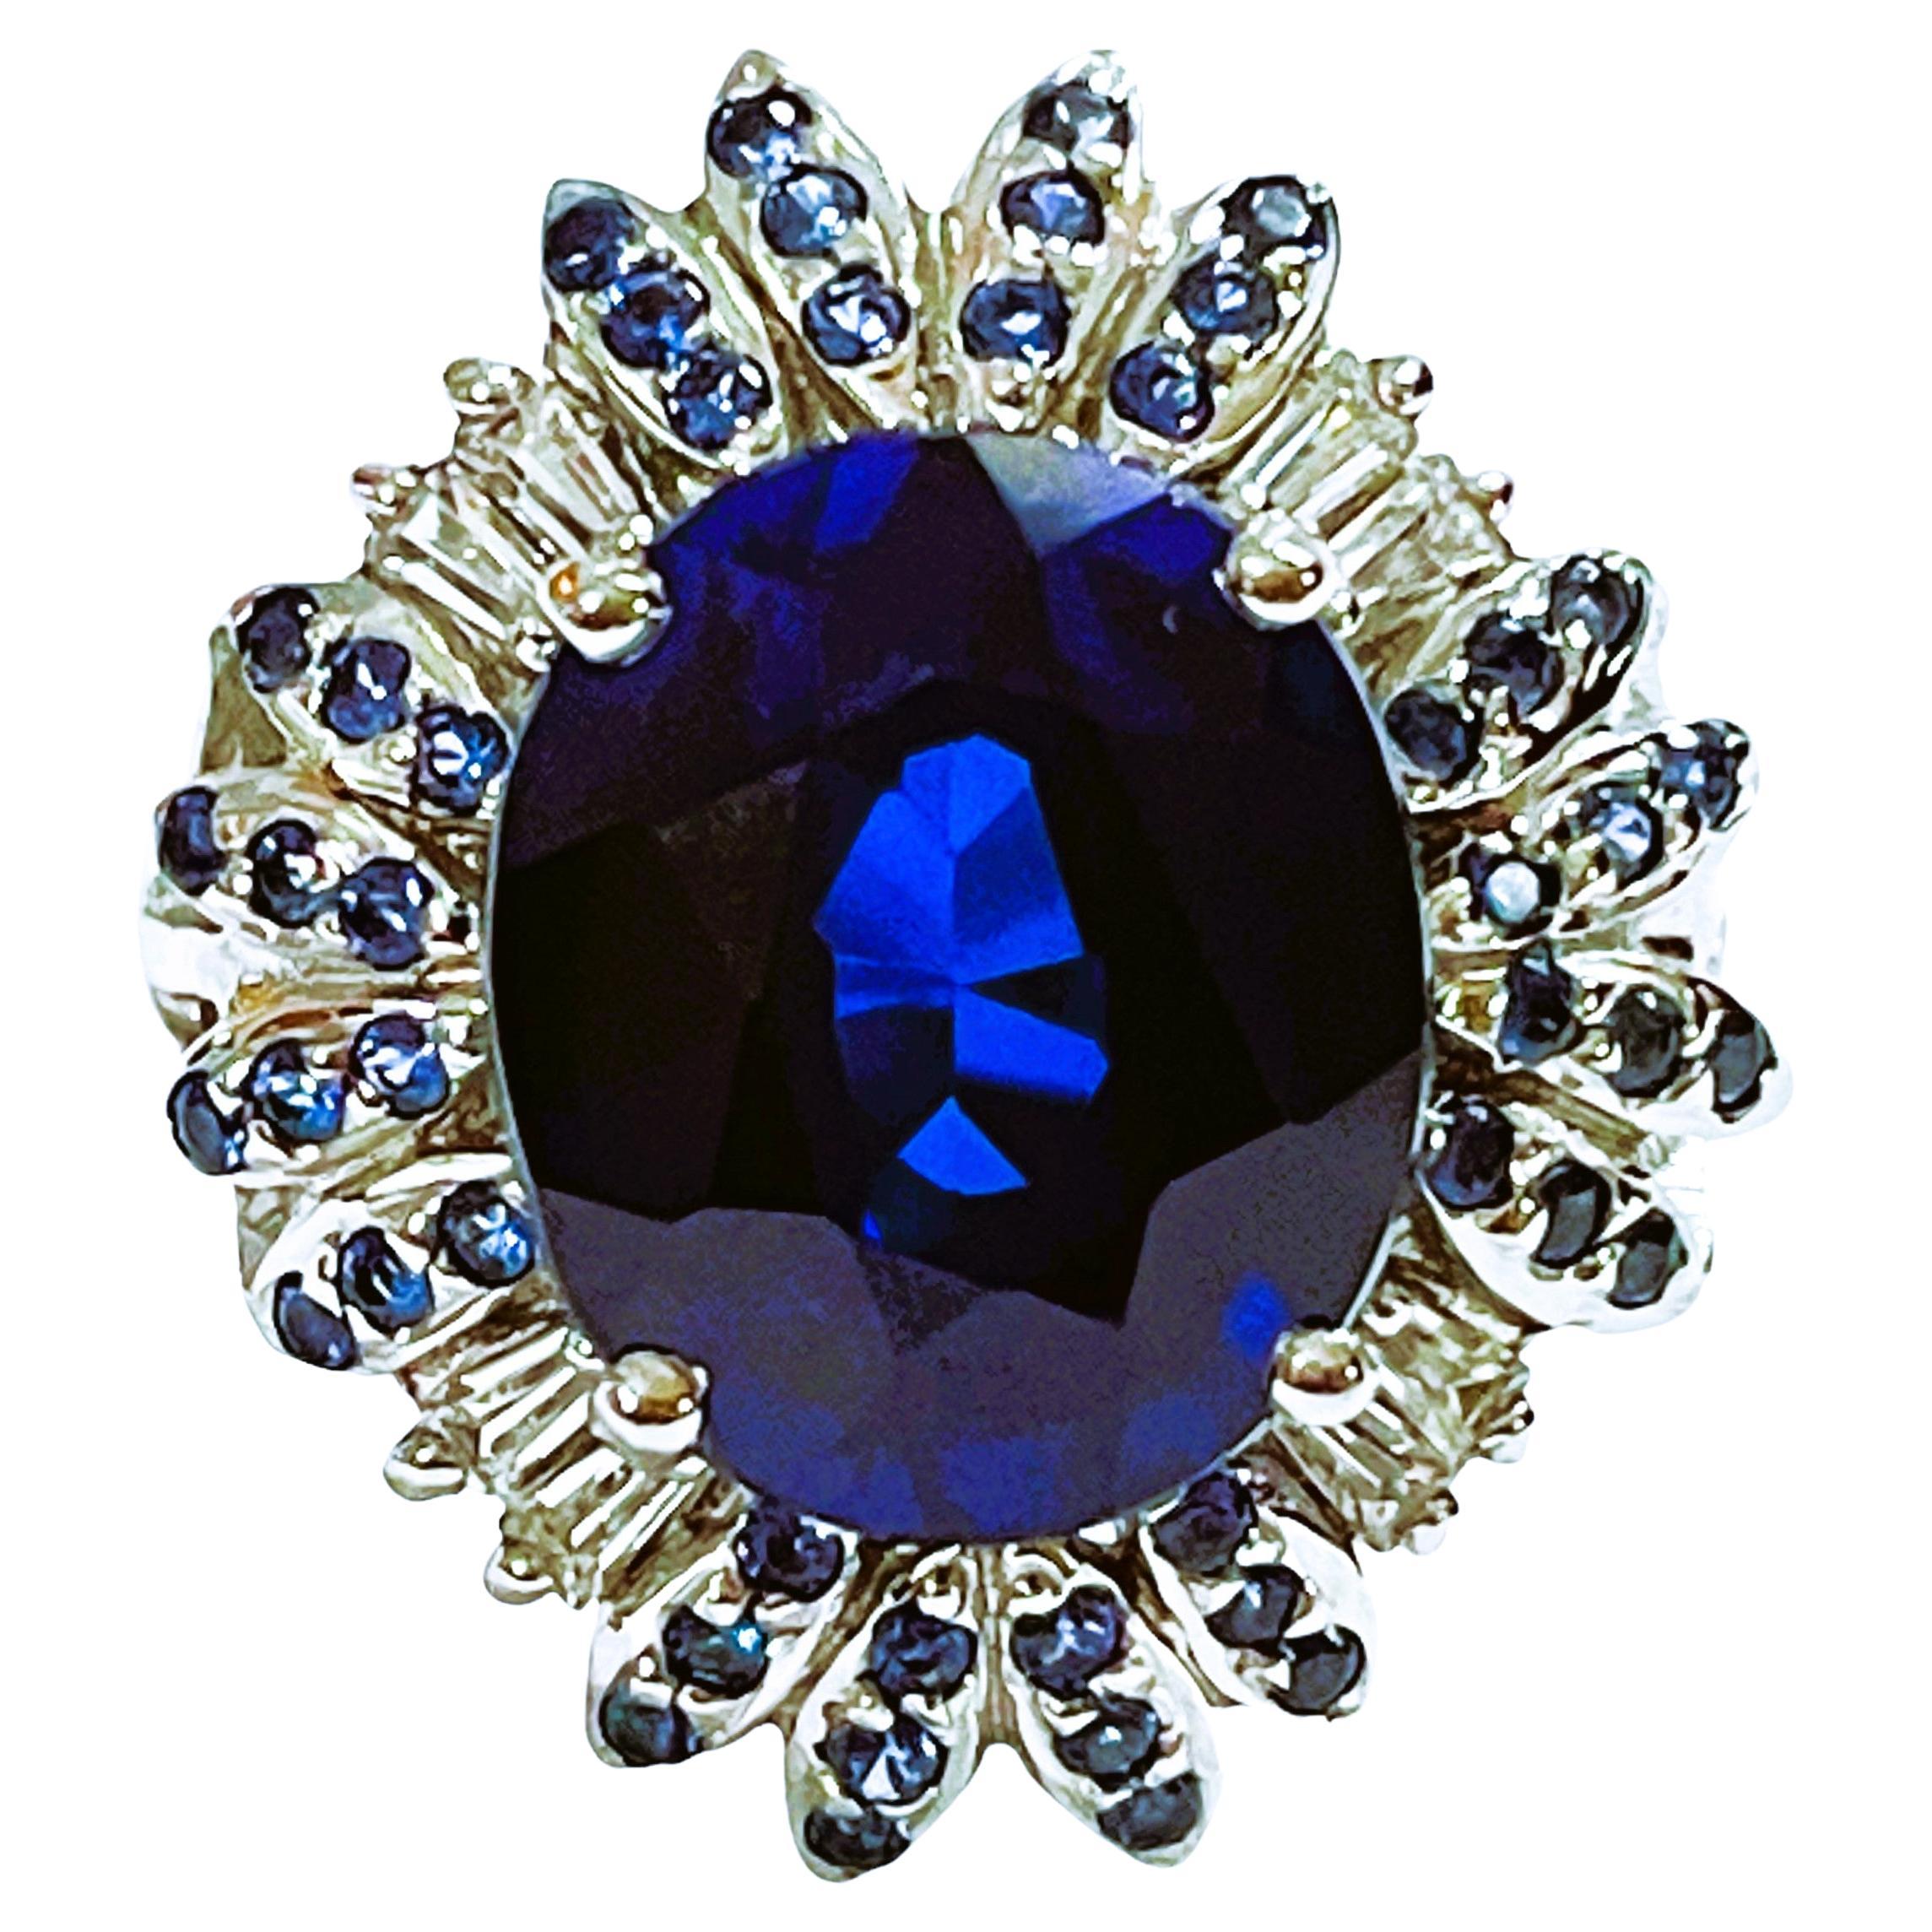 New African IF 9 Carat Kashmir Blue, Royal Blue and White Sapphire Sterling Ring